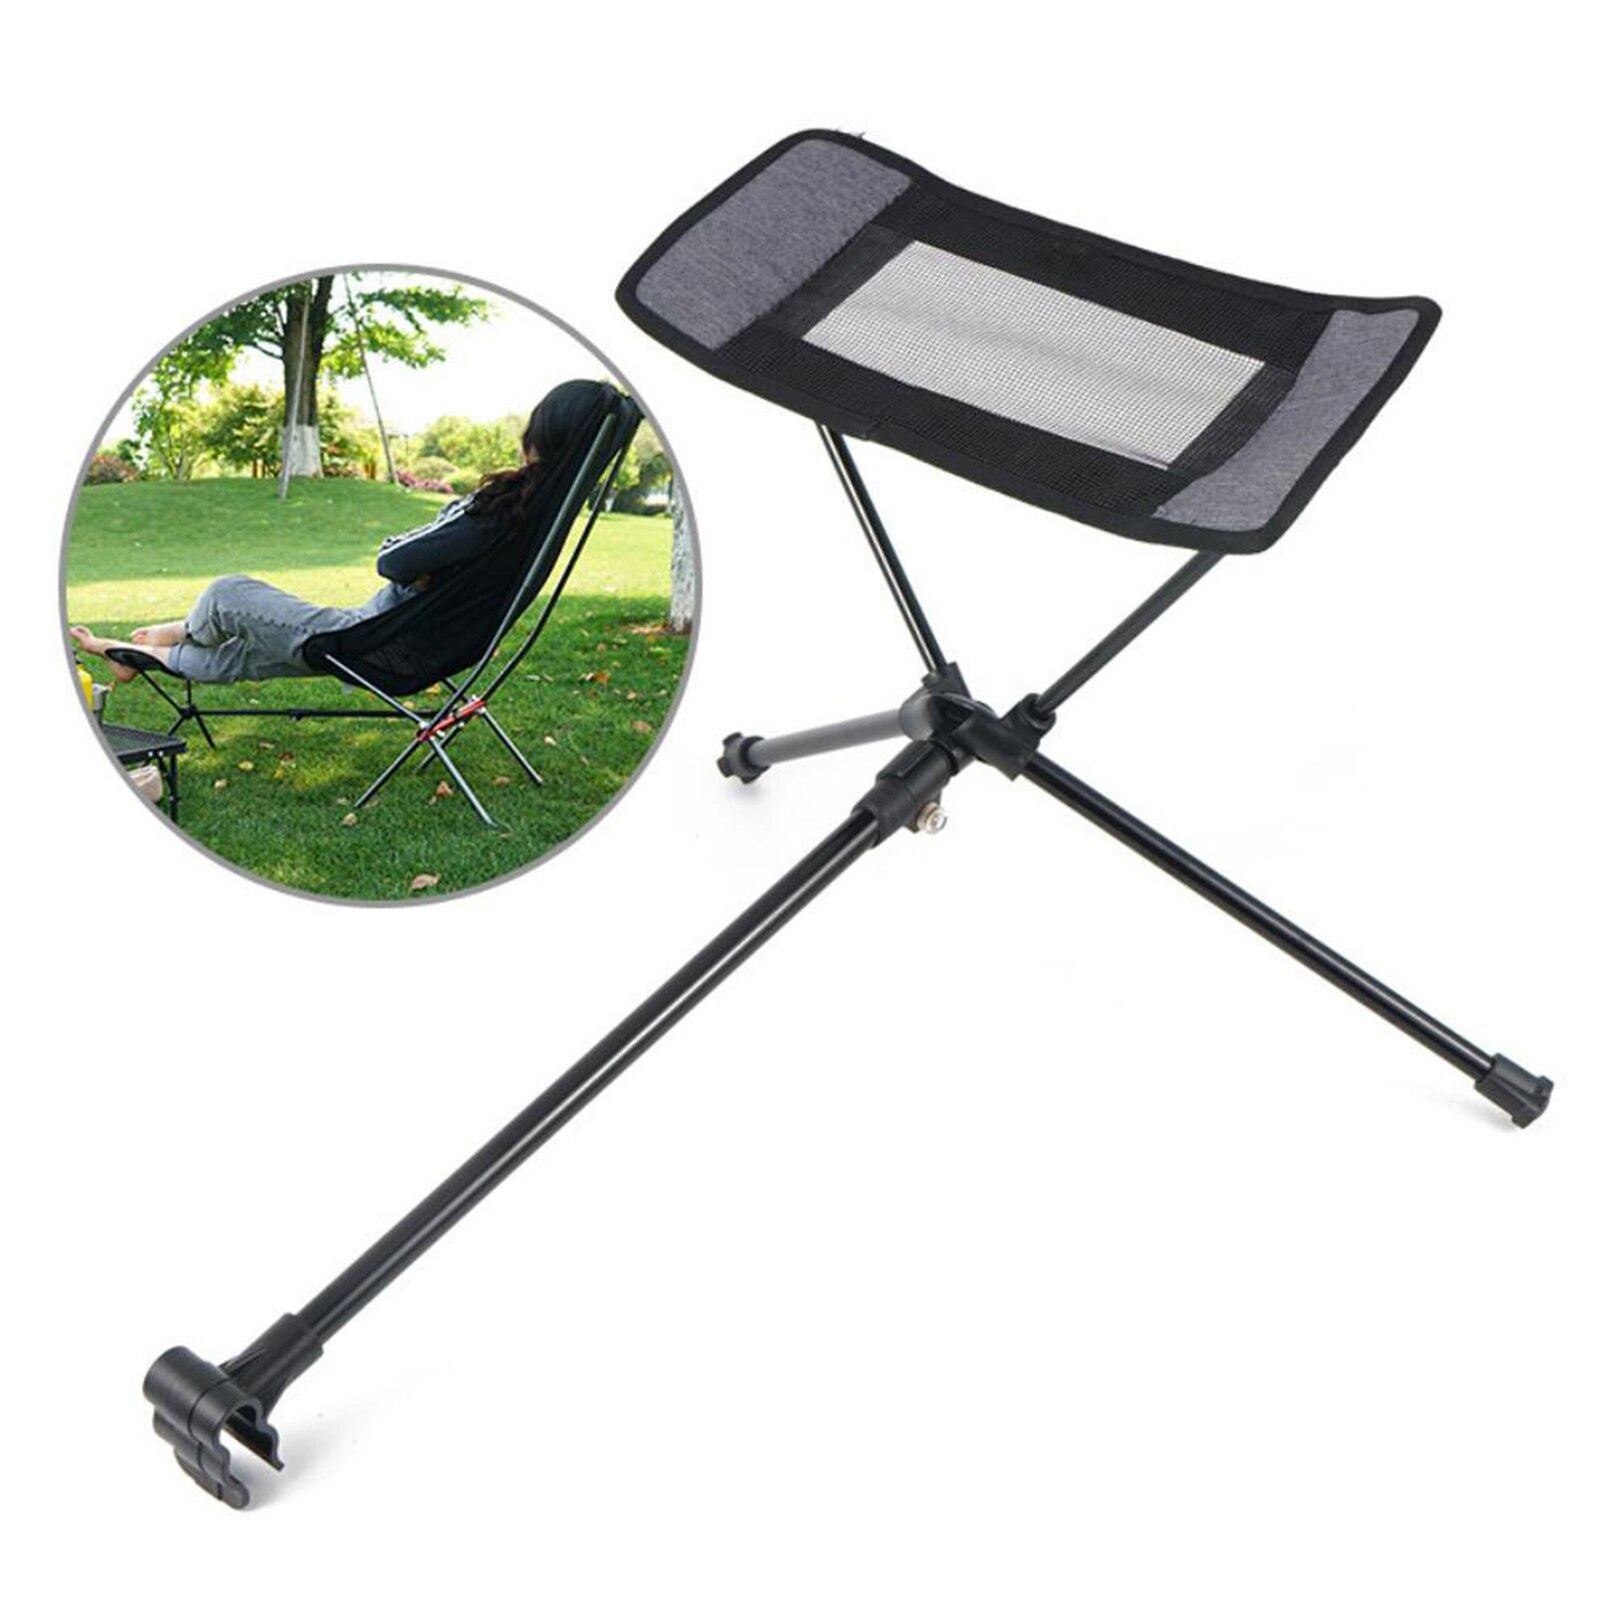 Compact Folding Chair Footrest, Non-slip Foldable Recliner Footstool, Chairs Retractable Feet Legs Lazy Stool with Carrying Bag